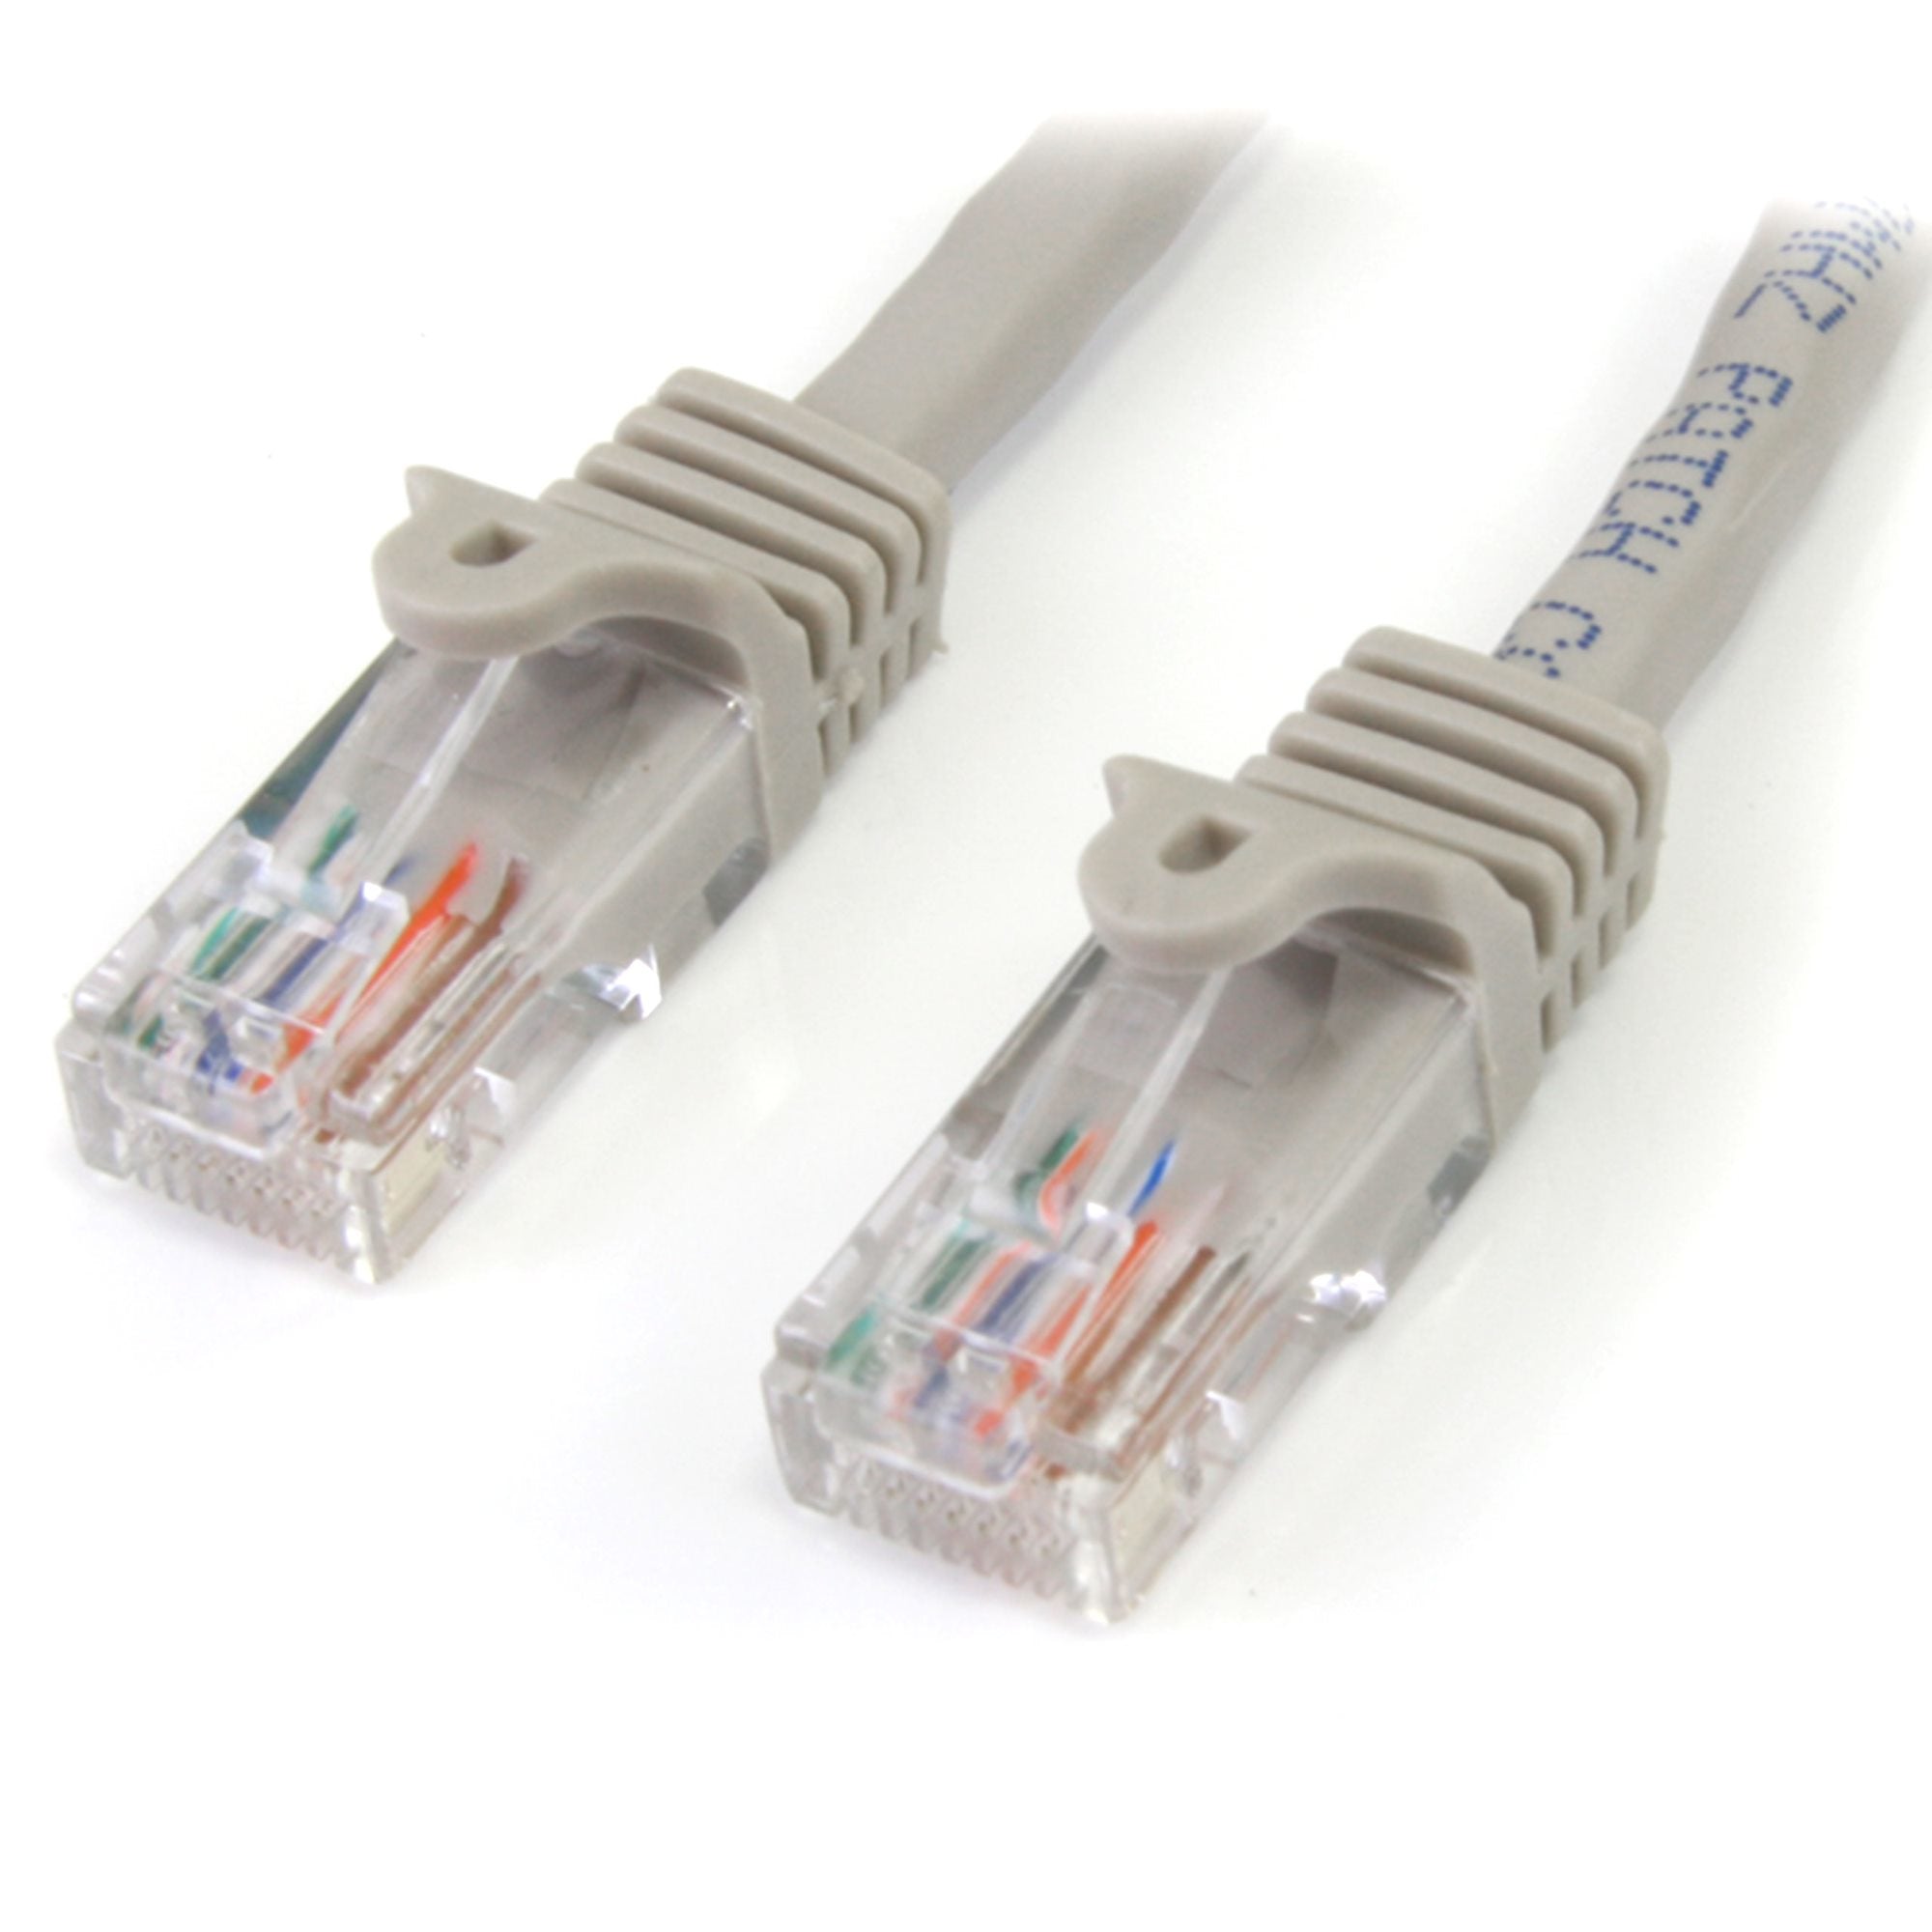 StarTech.com Cat5e Patch Cable with Snagless RJ45 Connectors - 3m, Gray